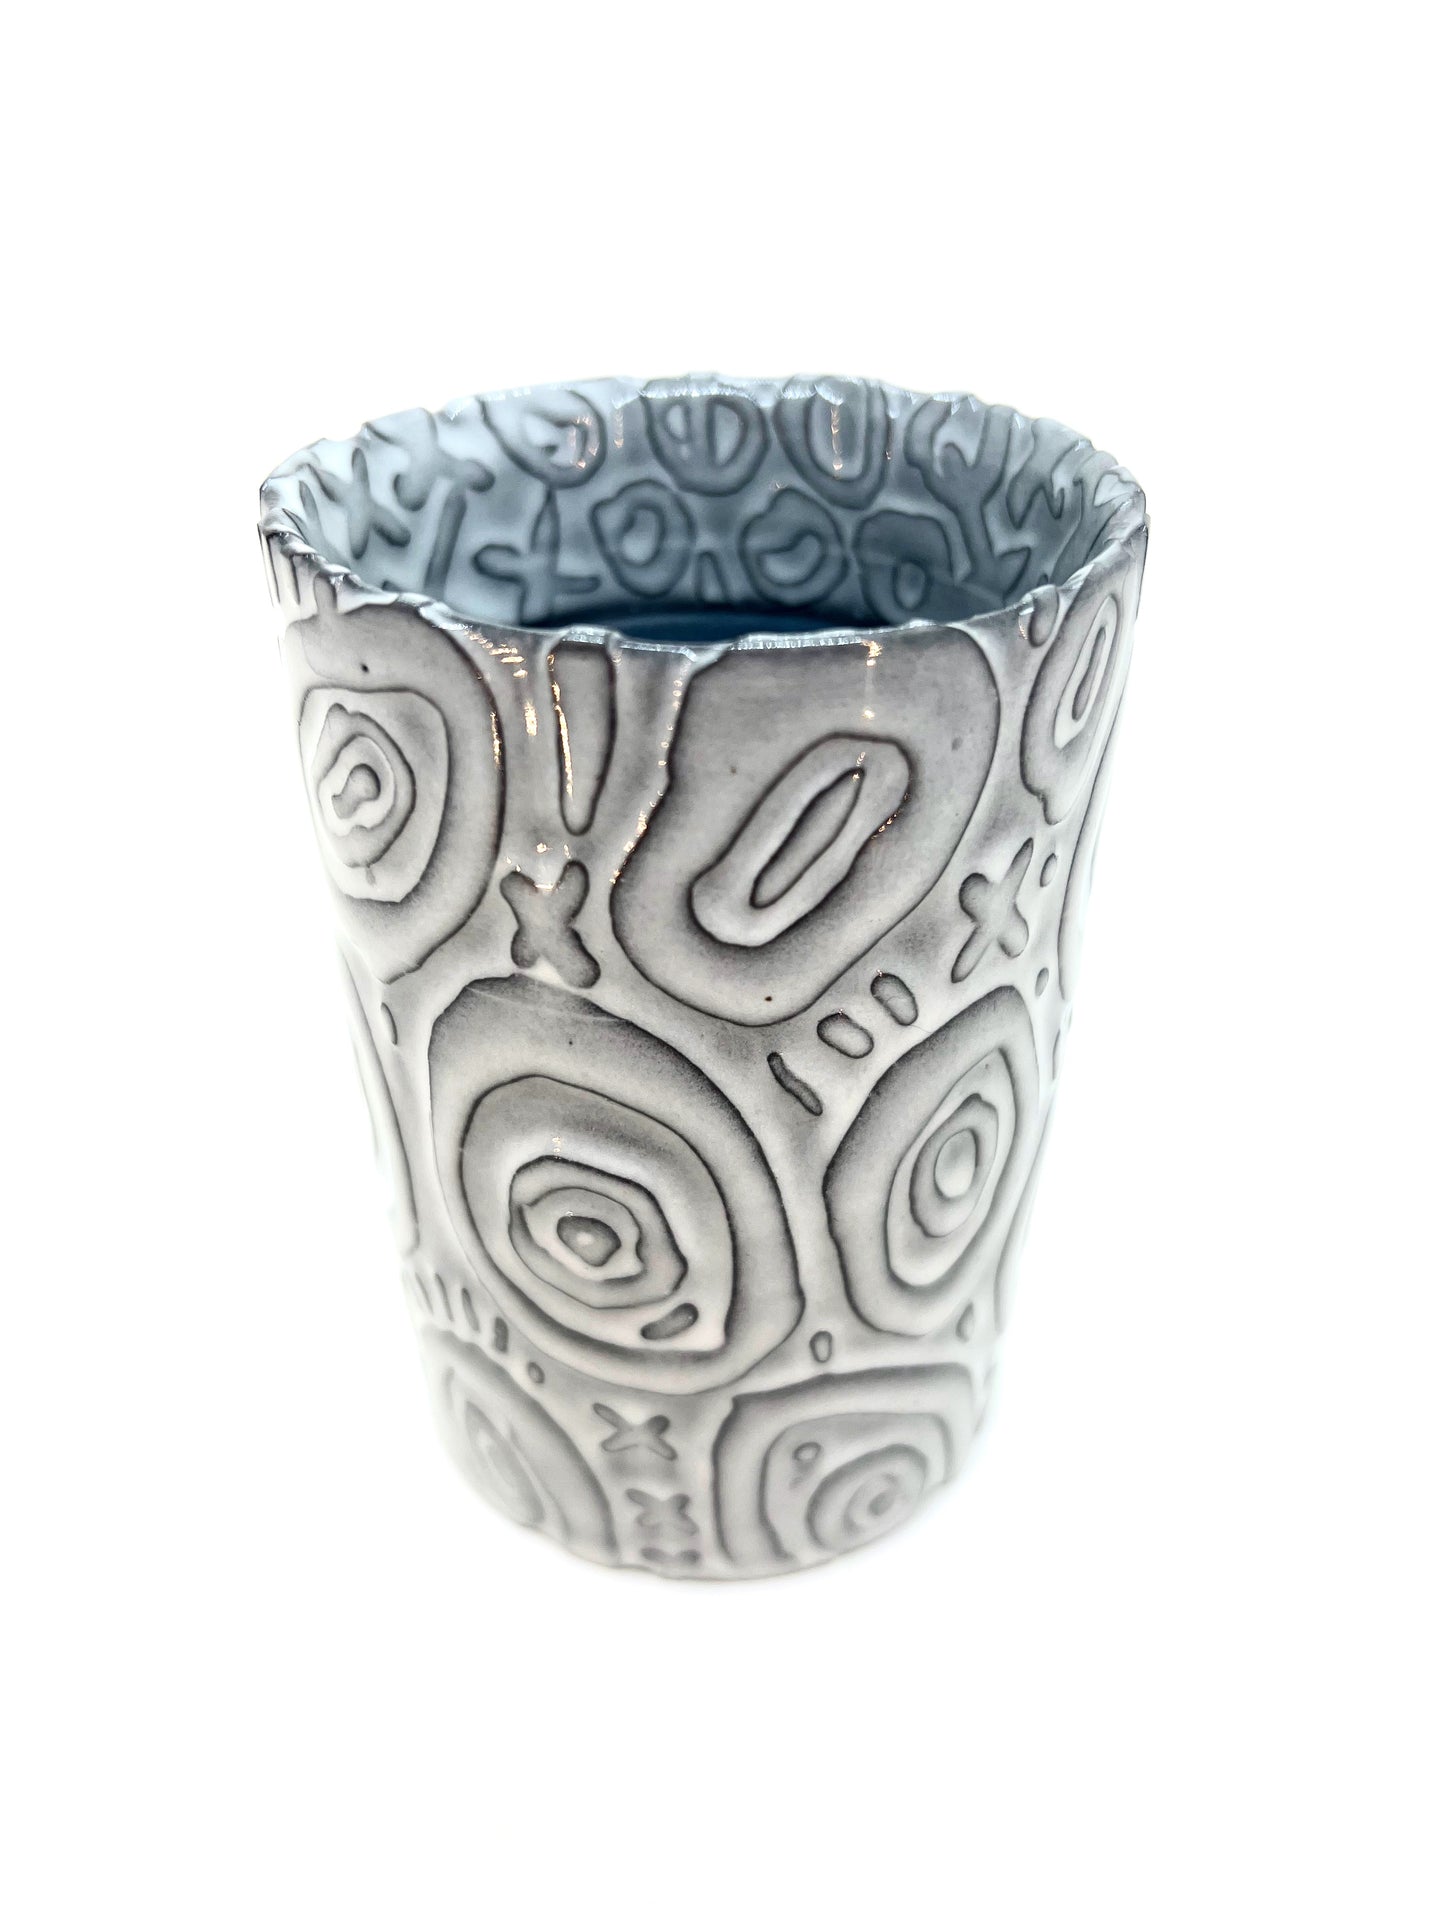 WATER CARVED TUMBLER 07